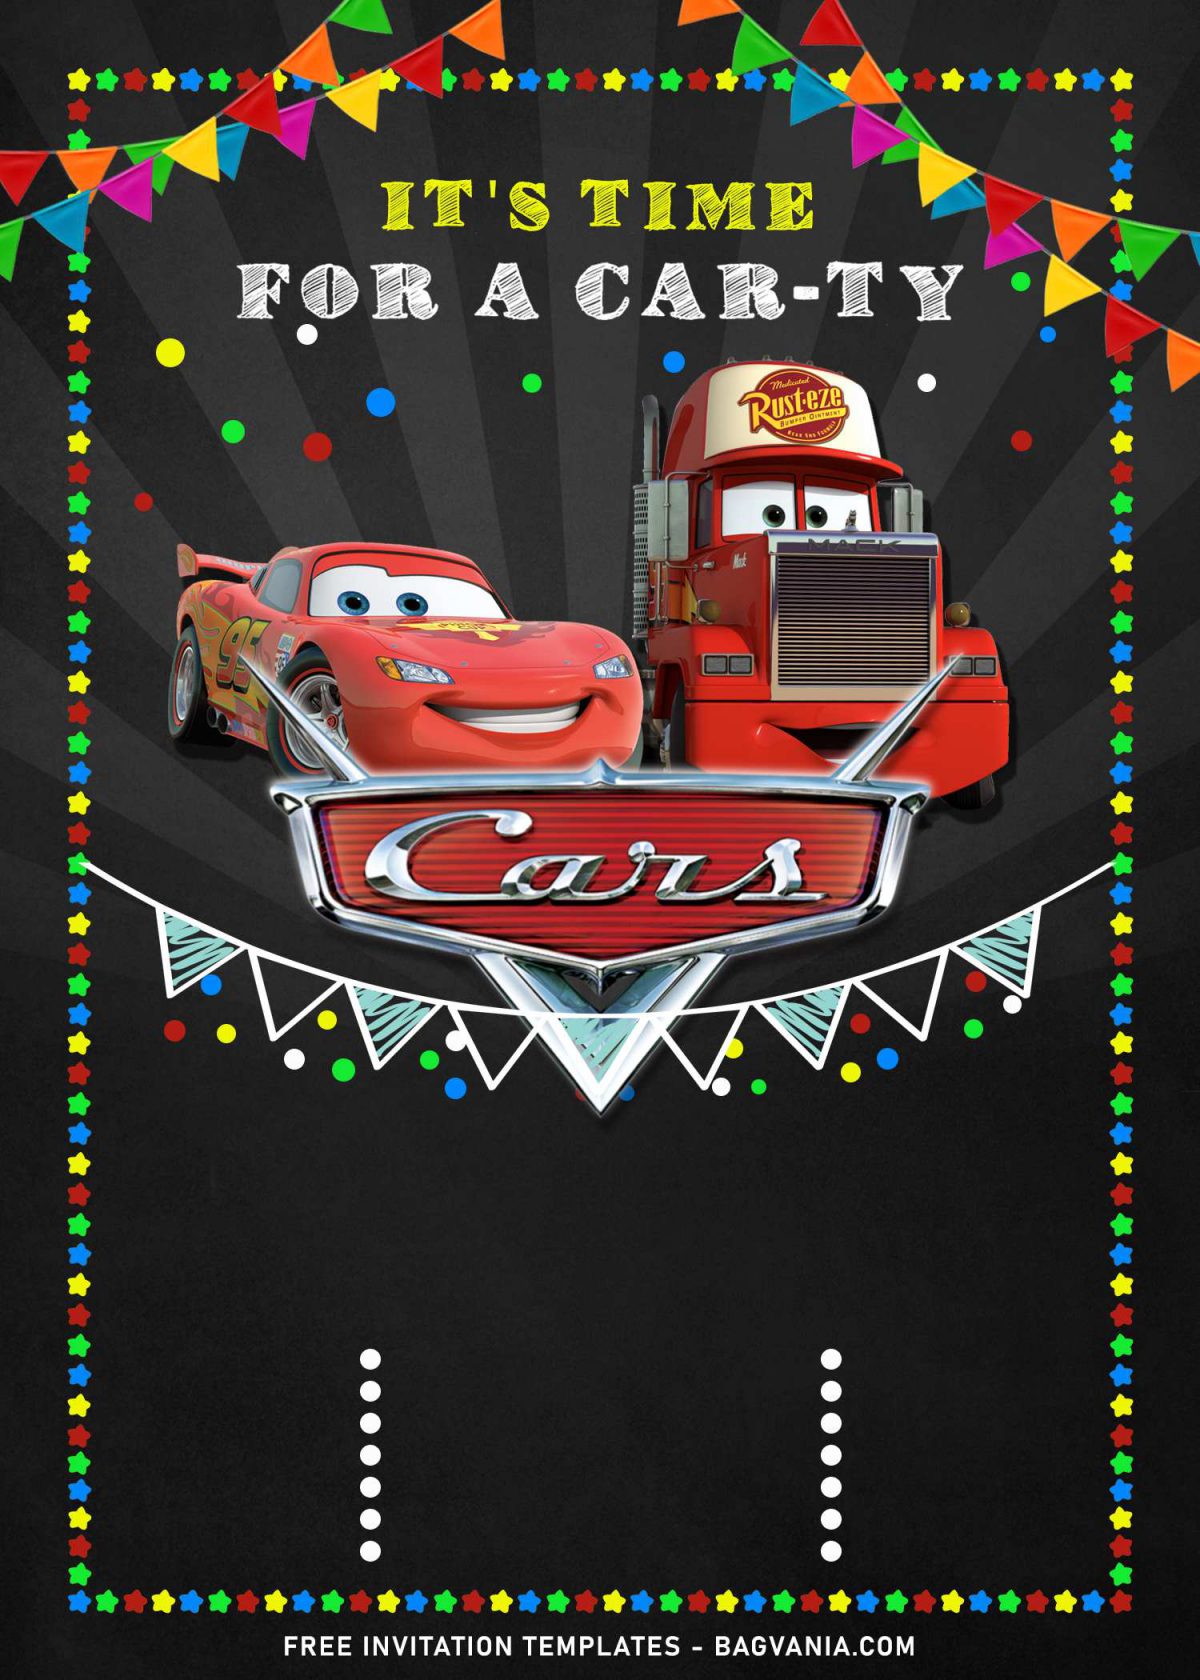 9+ Cool Personalized Disney Cars Birthday Invitation Templates and has colorful decorations